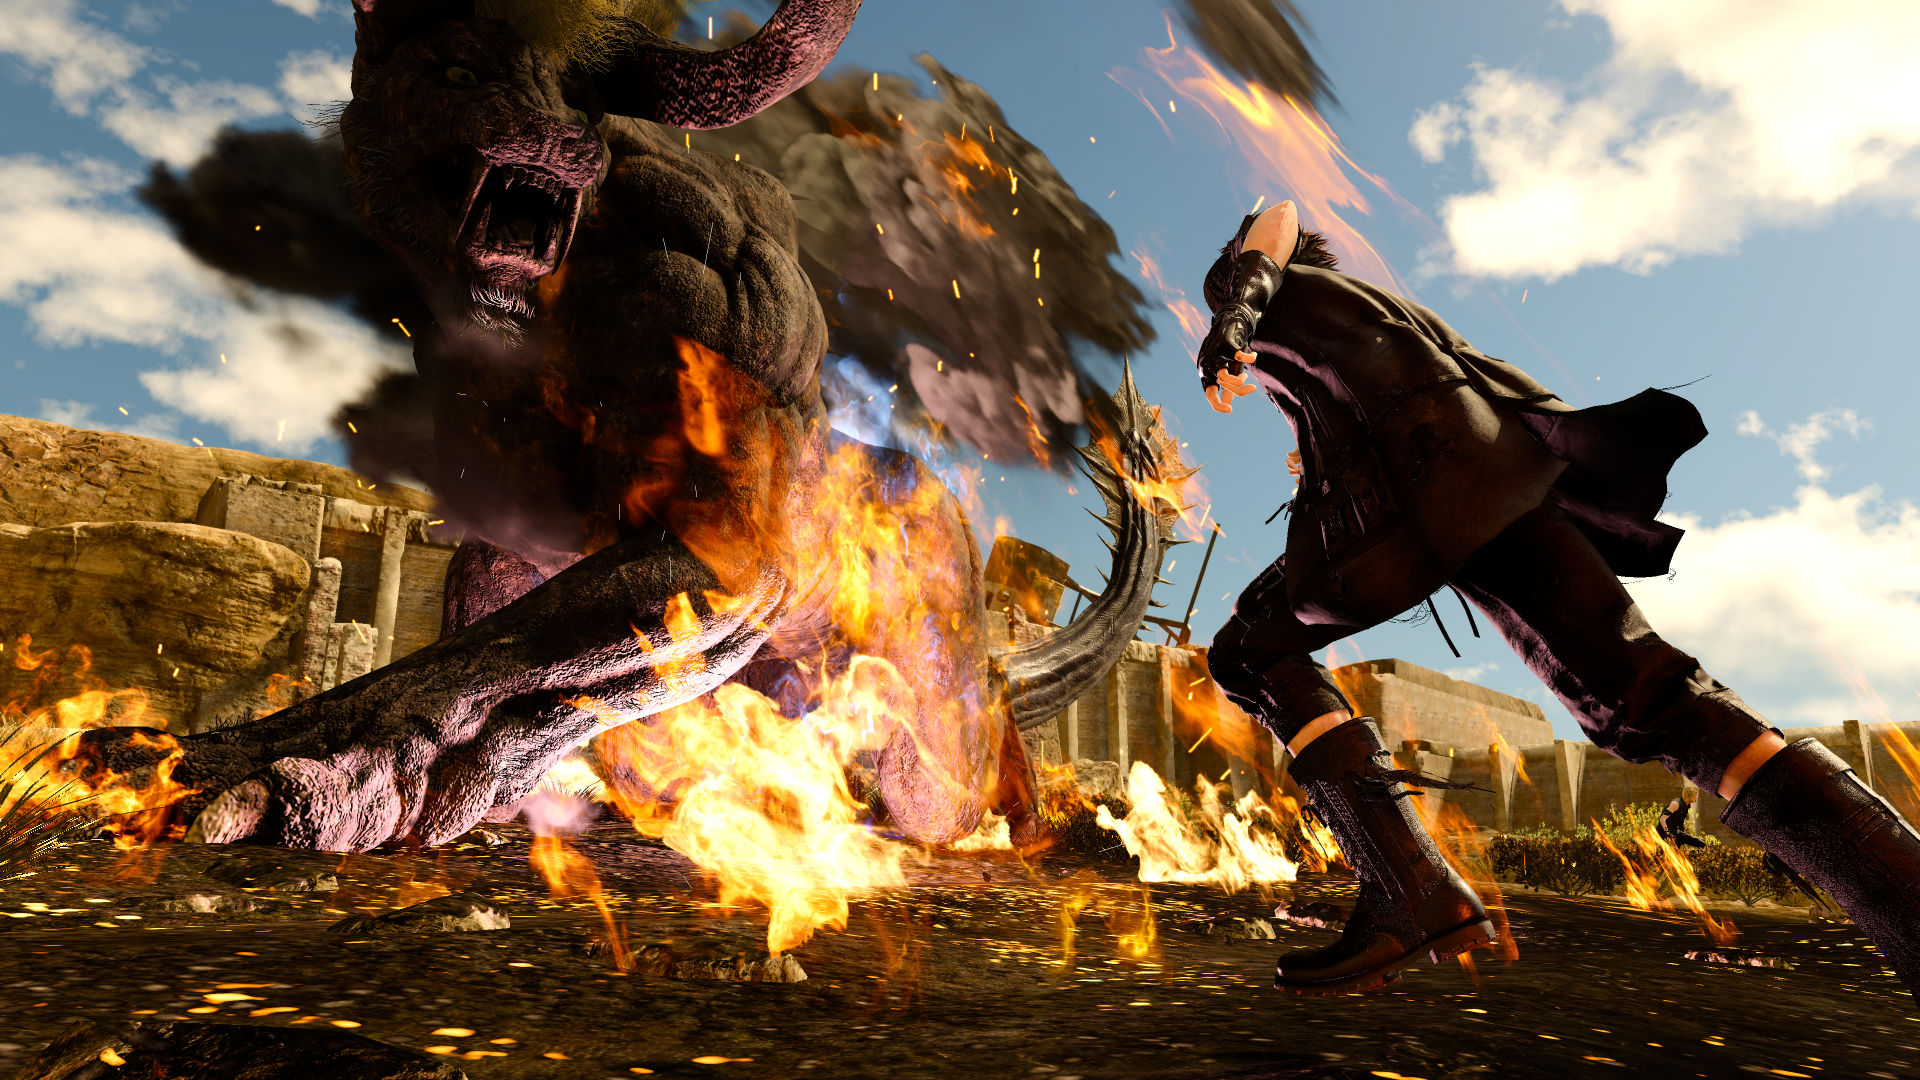 Noctus attacking a giant horned beast on fire.